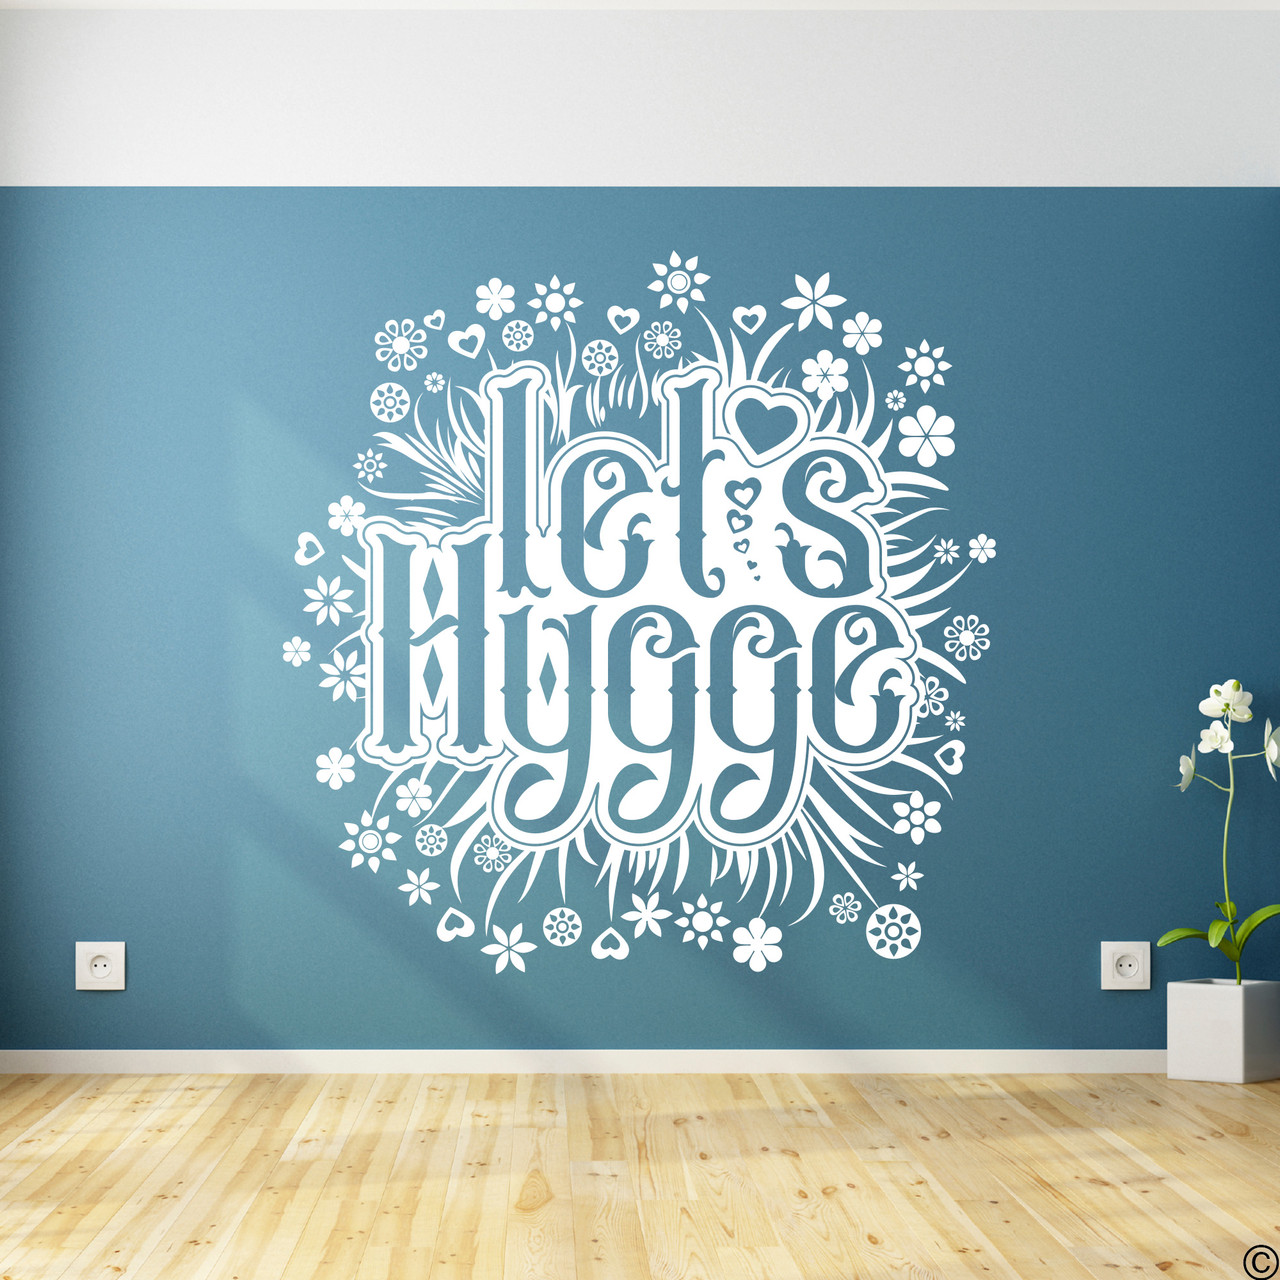 The Let's Hygge wall decal quote in white vinyl color.